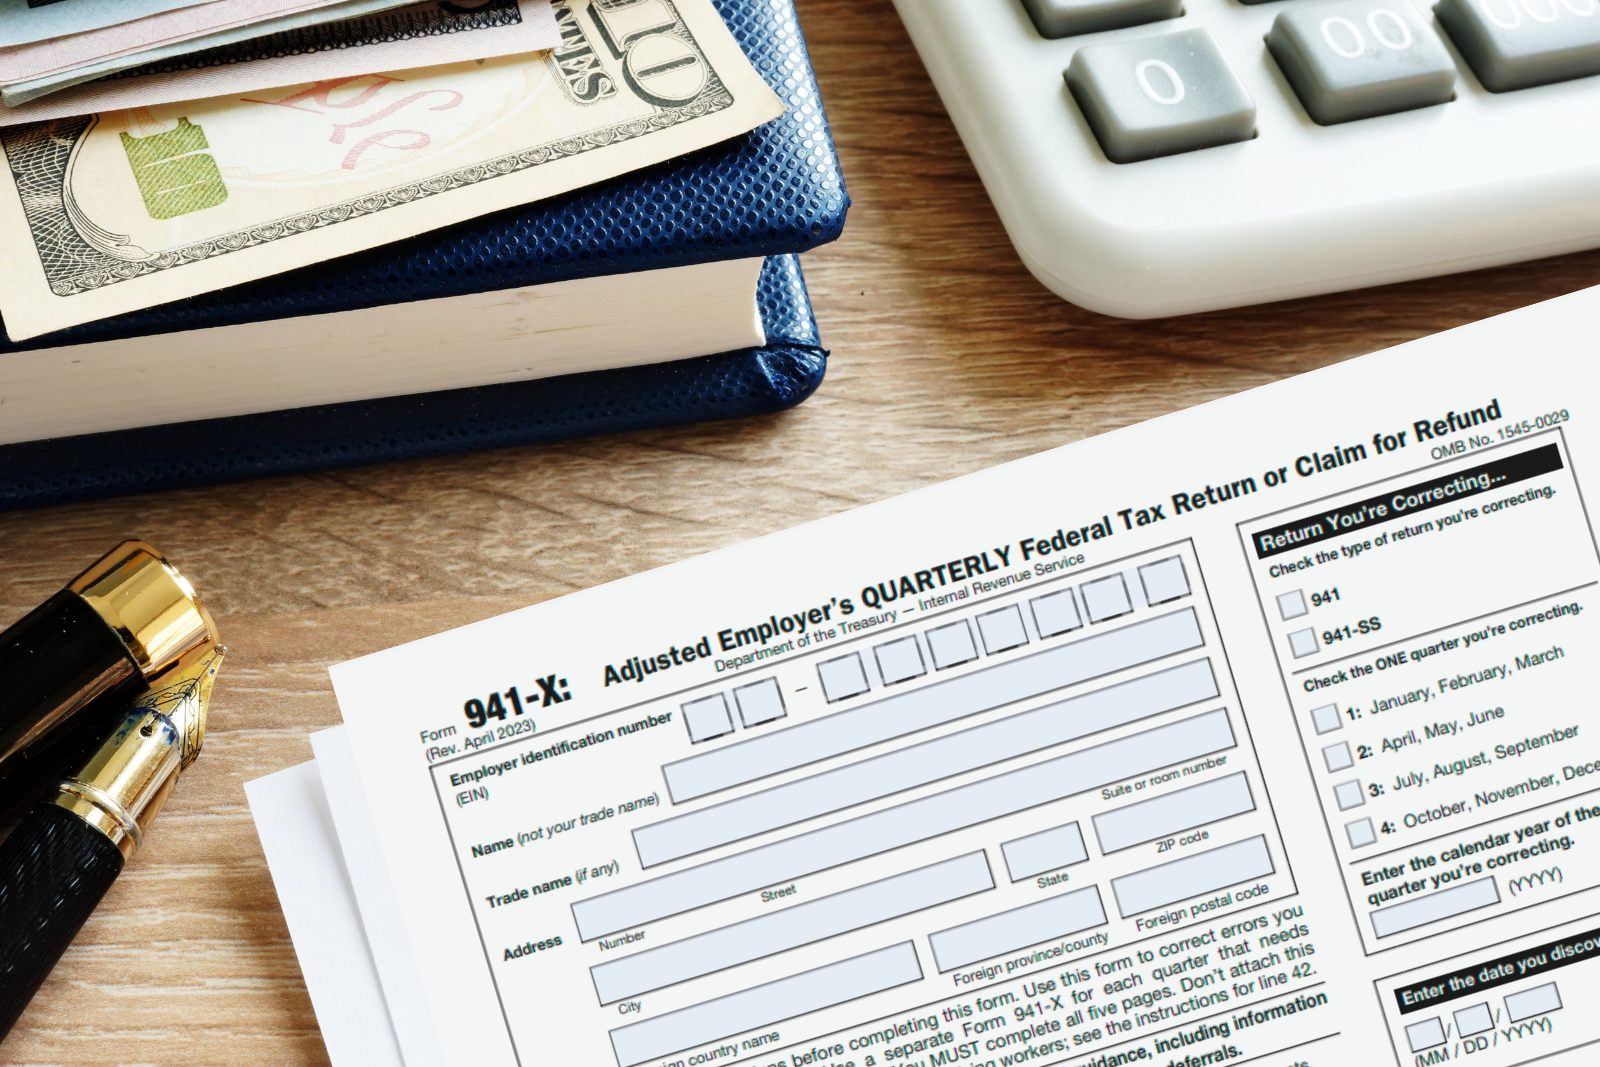 What is the Process for Submitting an ERTC Tax Credit Claim?